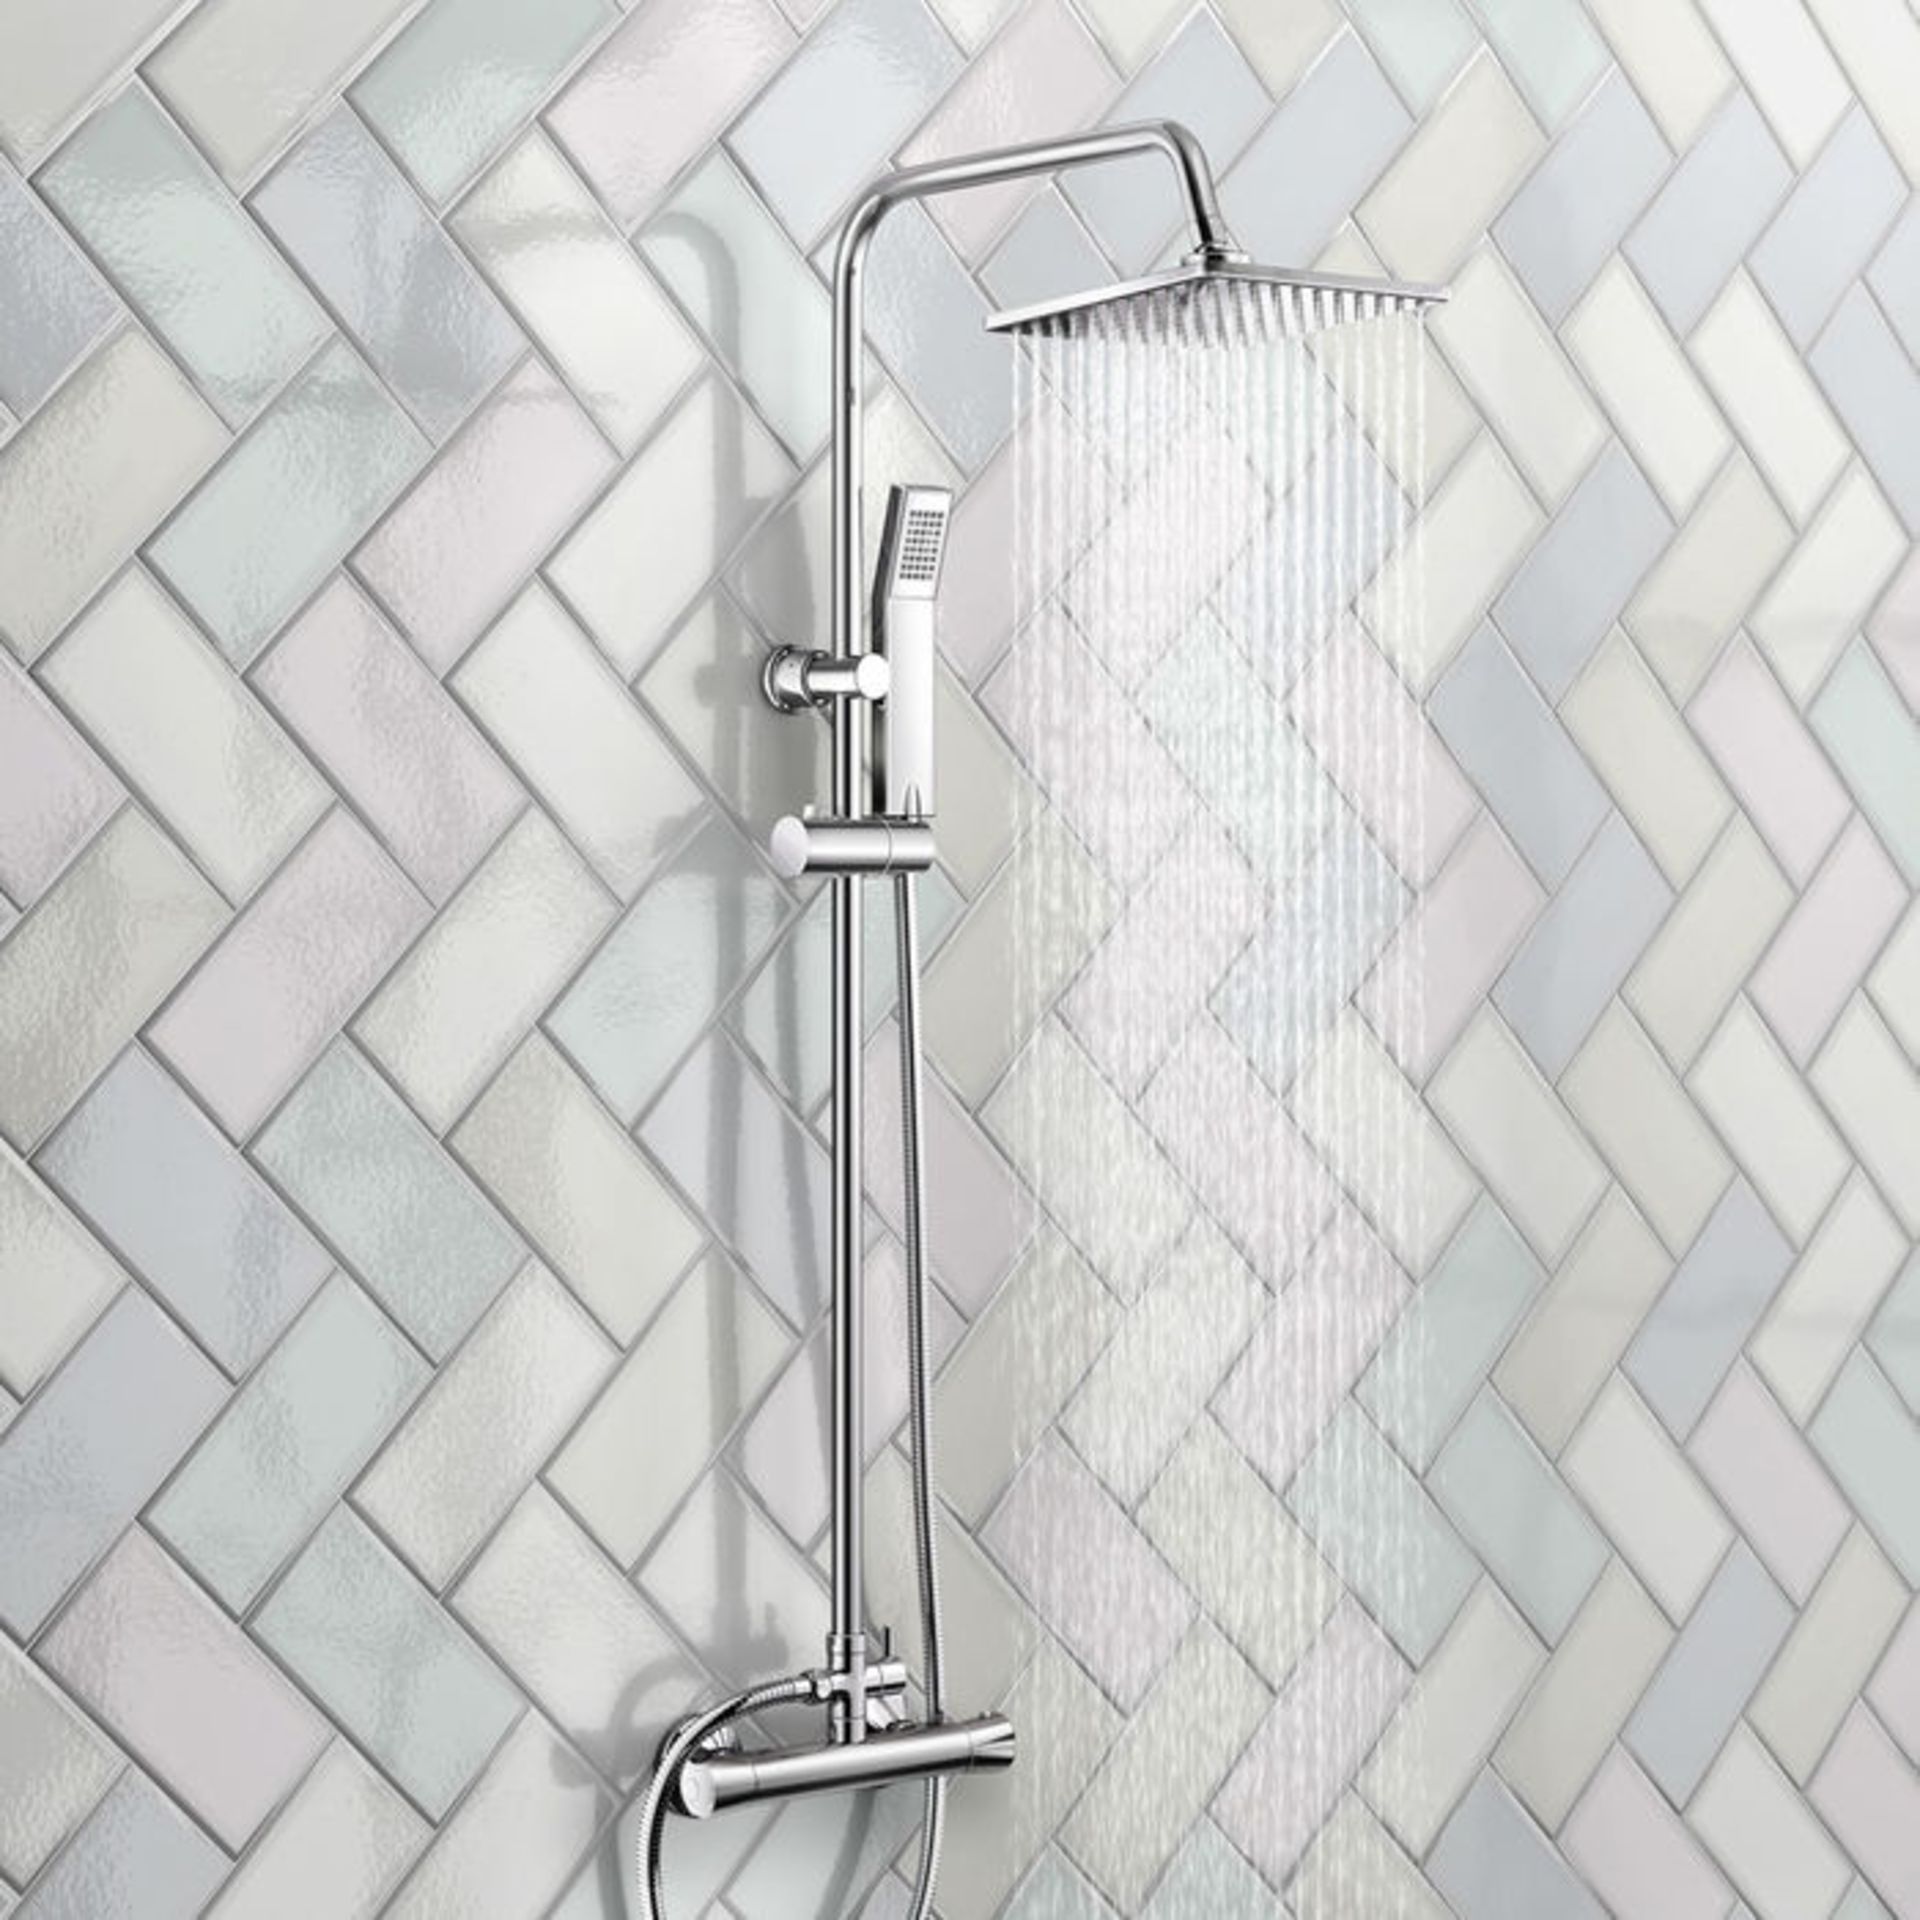 (AH34) Square Exposed Thermostatic Shower Kit & Medium Head. Curved features and contemporary